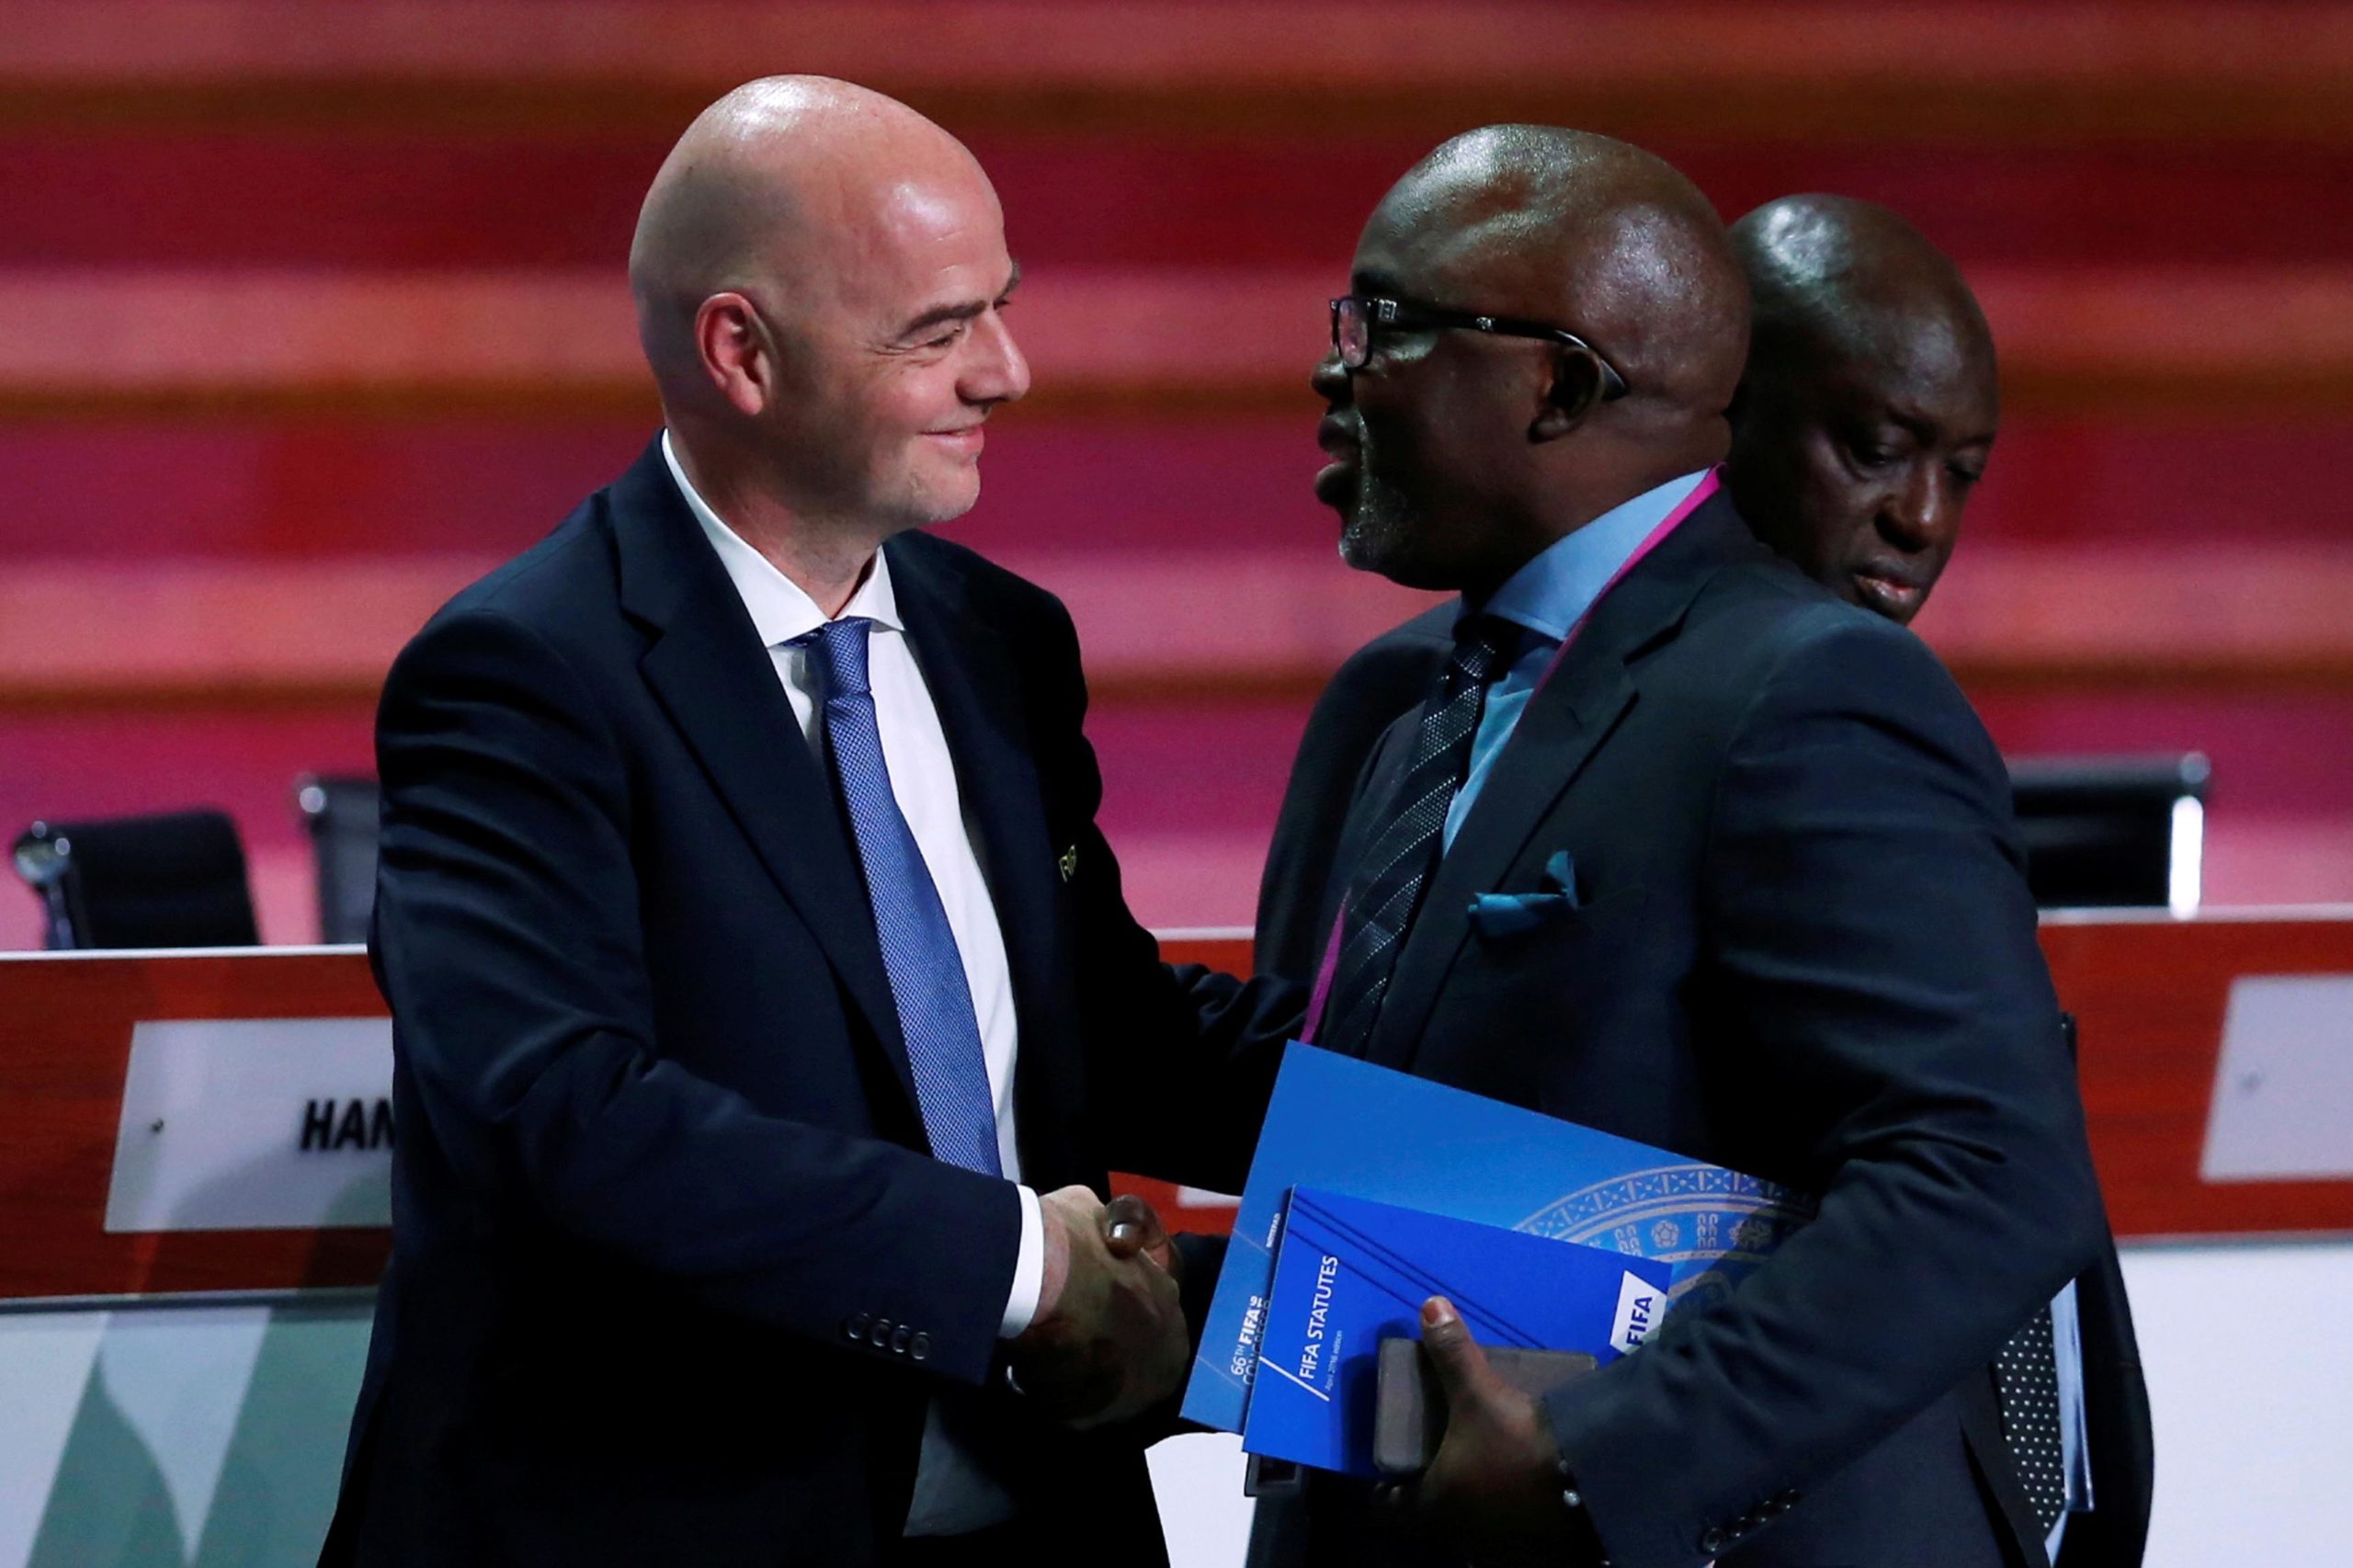 FIFA President Gianni Infantino speaks with Amaju Melvin Pinnick, President of the Nigeria Football Federation (NFF), during the 66th FIFA Congress in Mexico City